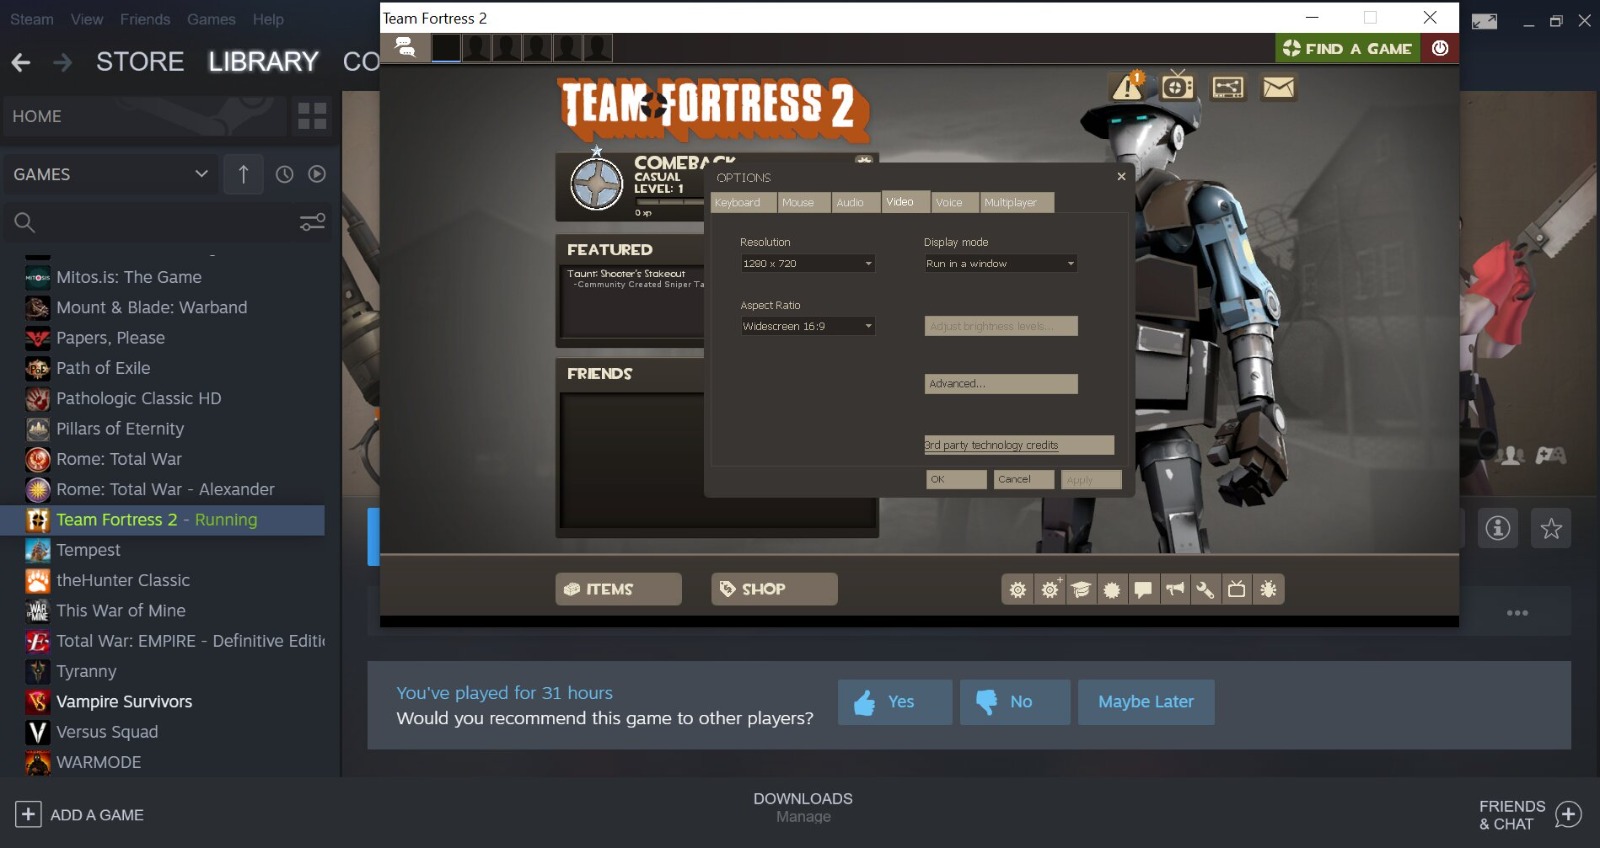 Best Graphics Settings for TF2